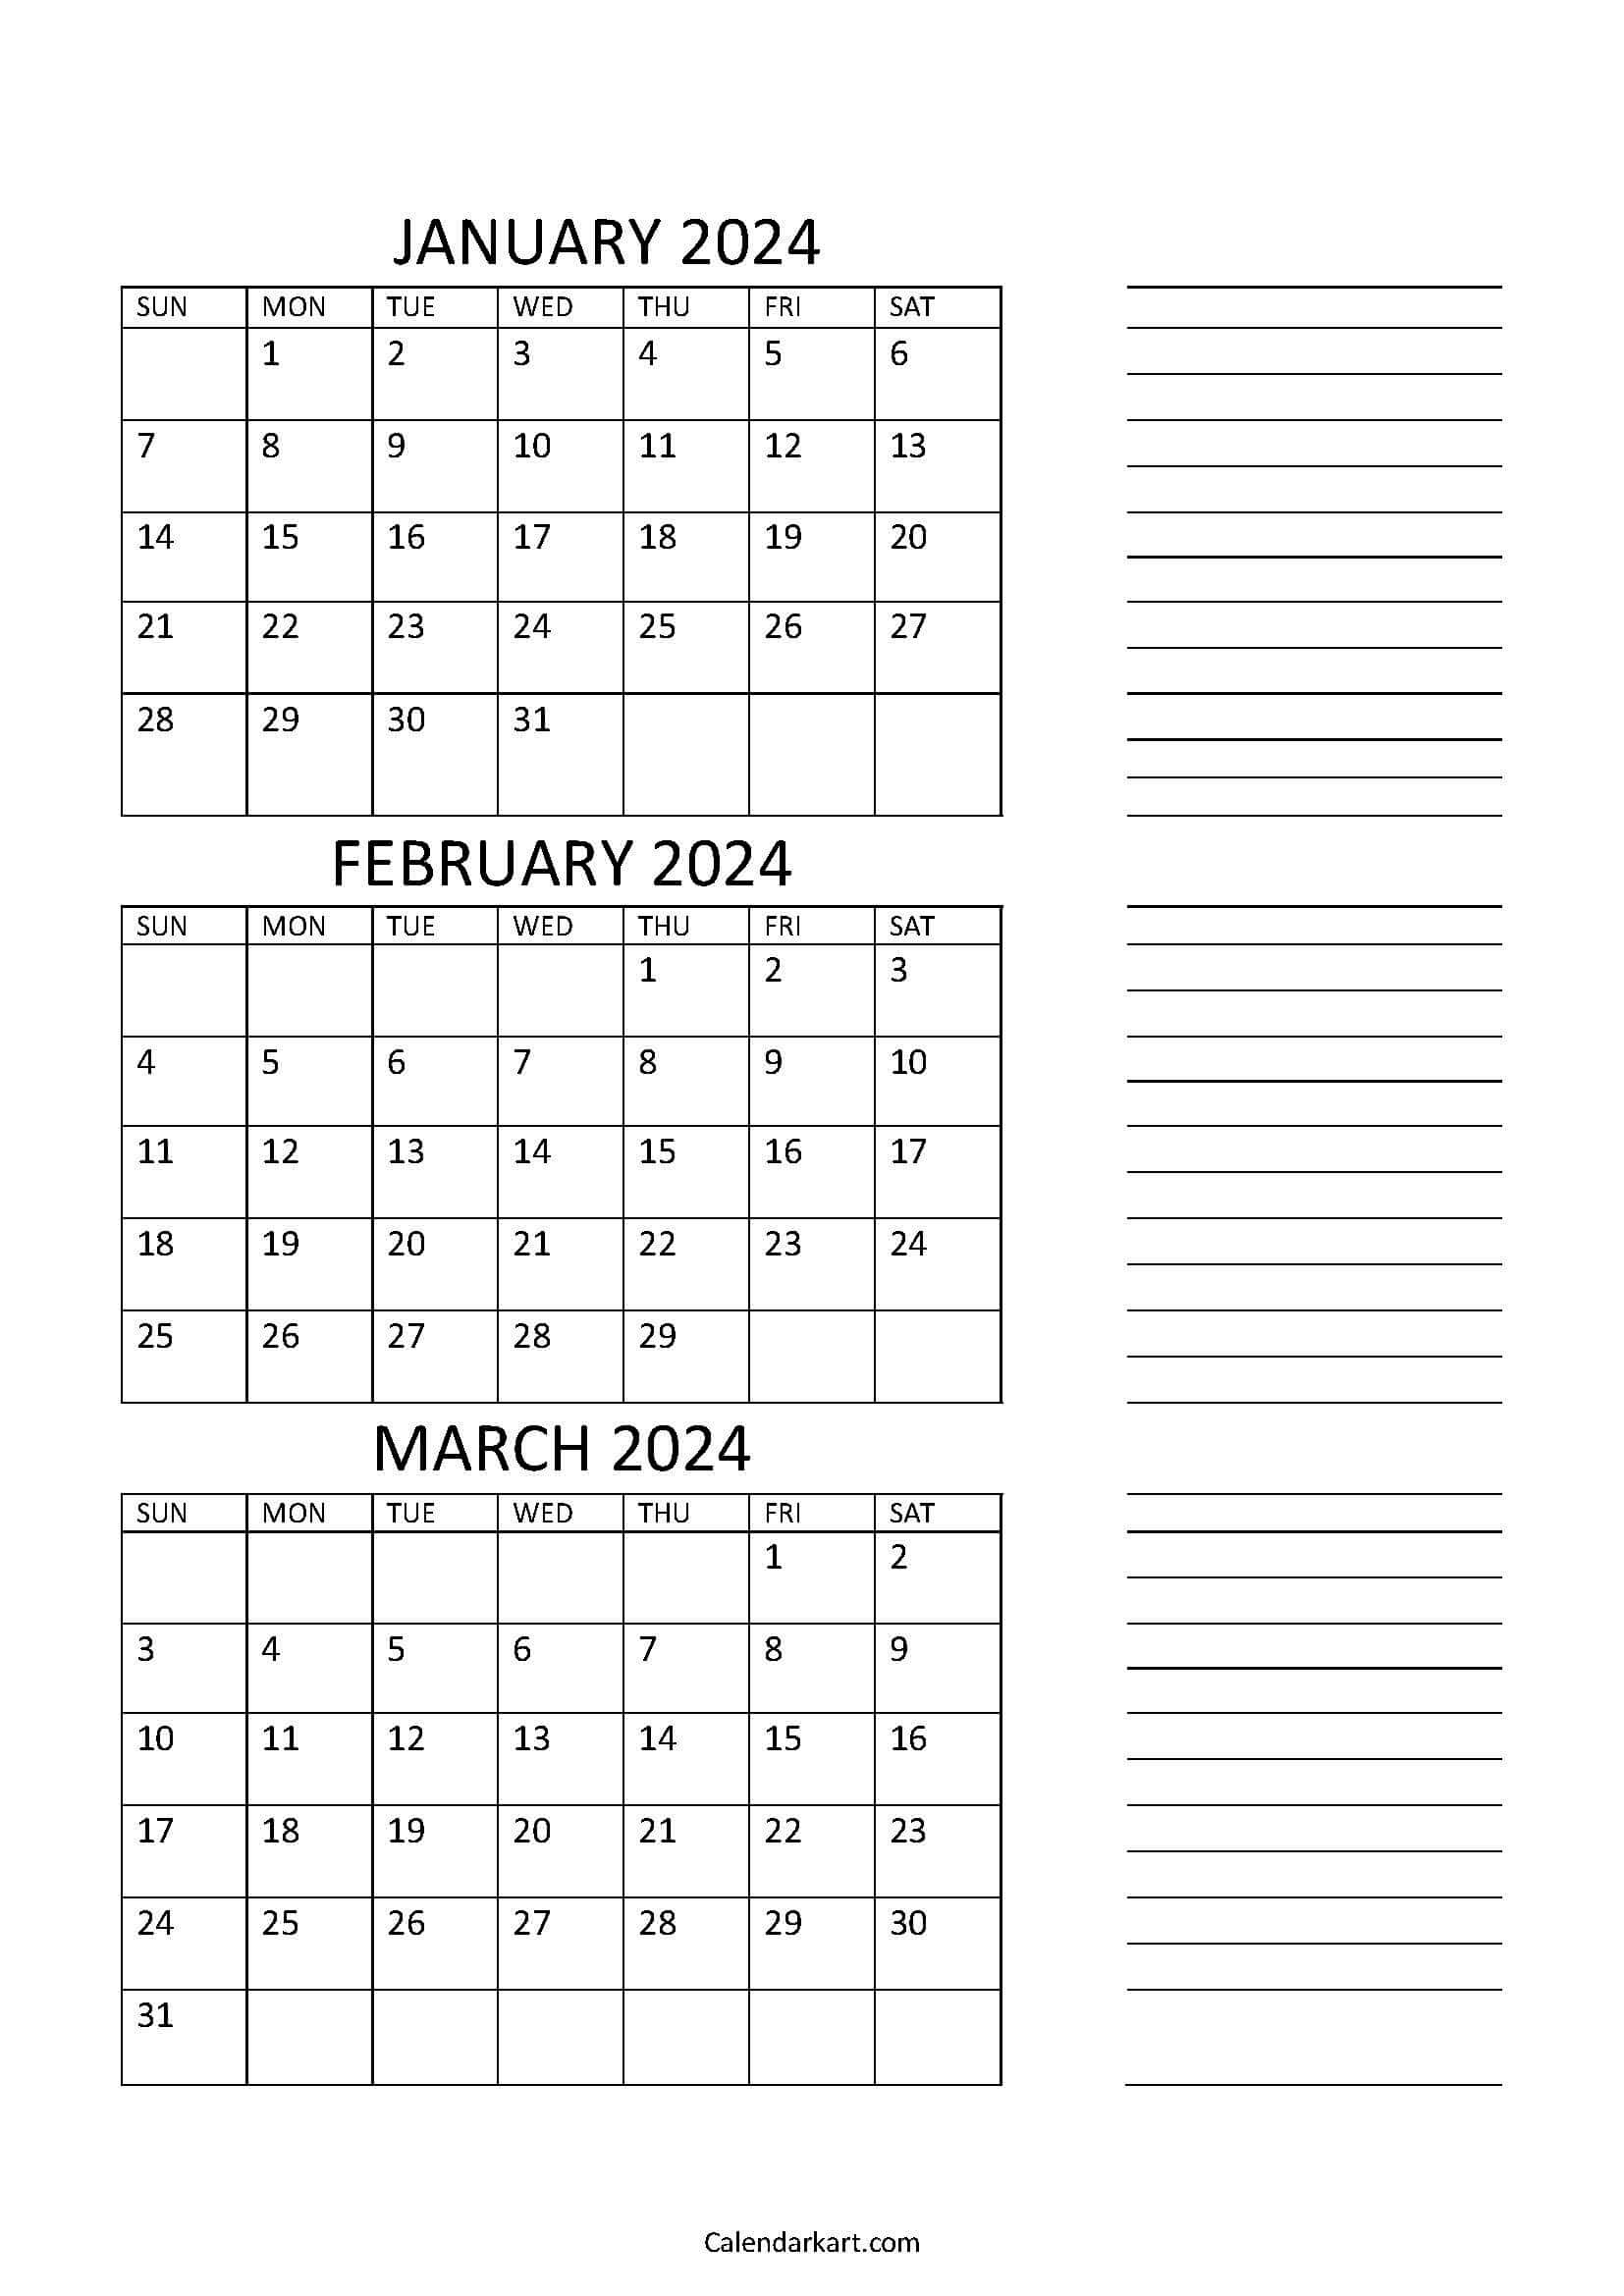 Free Printable January To March 2024 Calendar - Calendarkart with regard to Free Printable Calendar 2024 Three Months Per Page